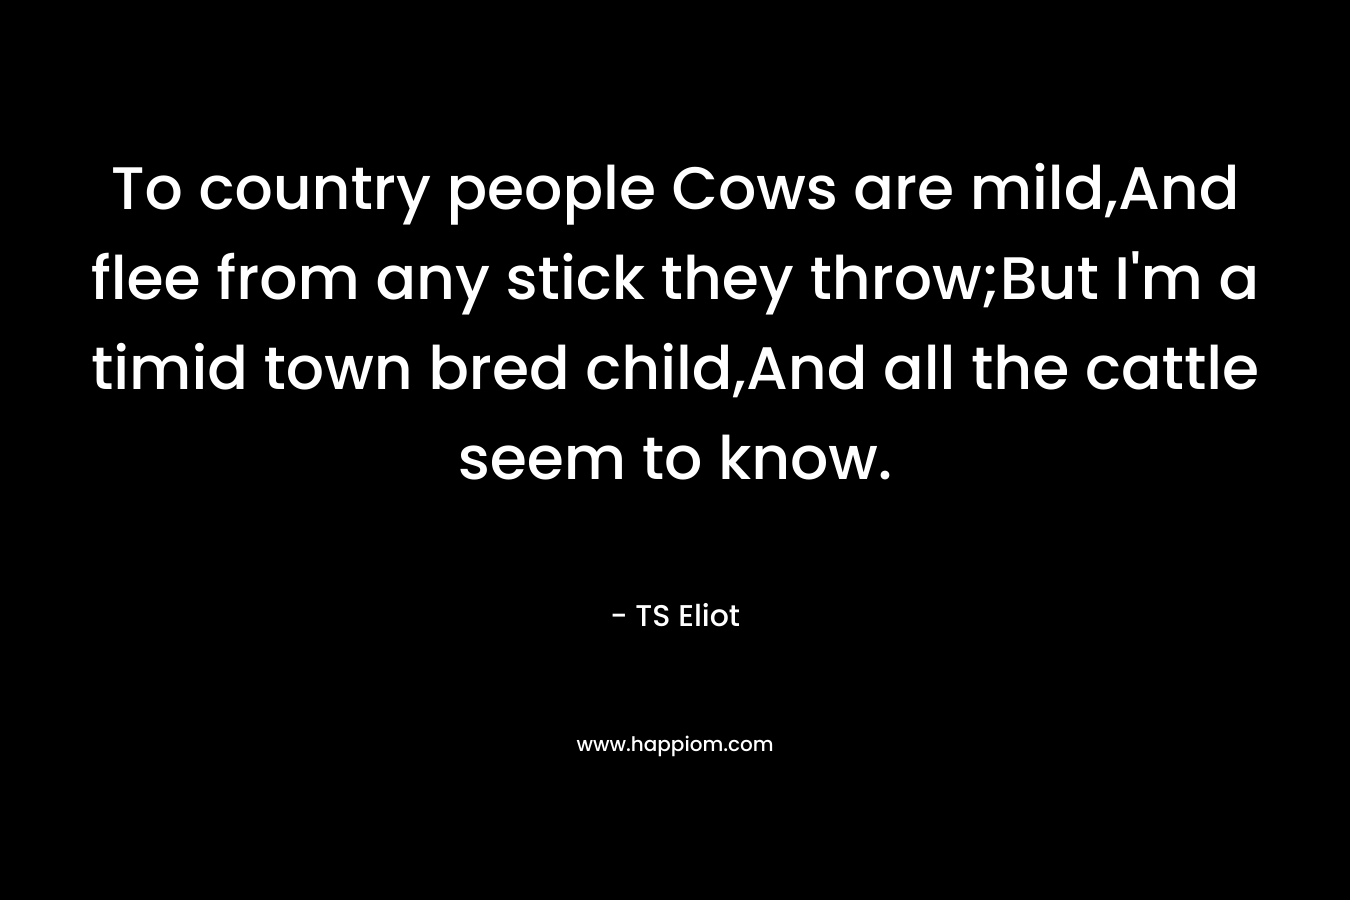 To country people Cows are mild,And flee from any stick they throw;But I'm a timid town bred child,And all the cattle seem to know.